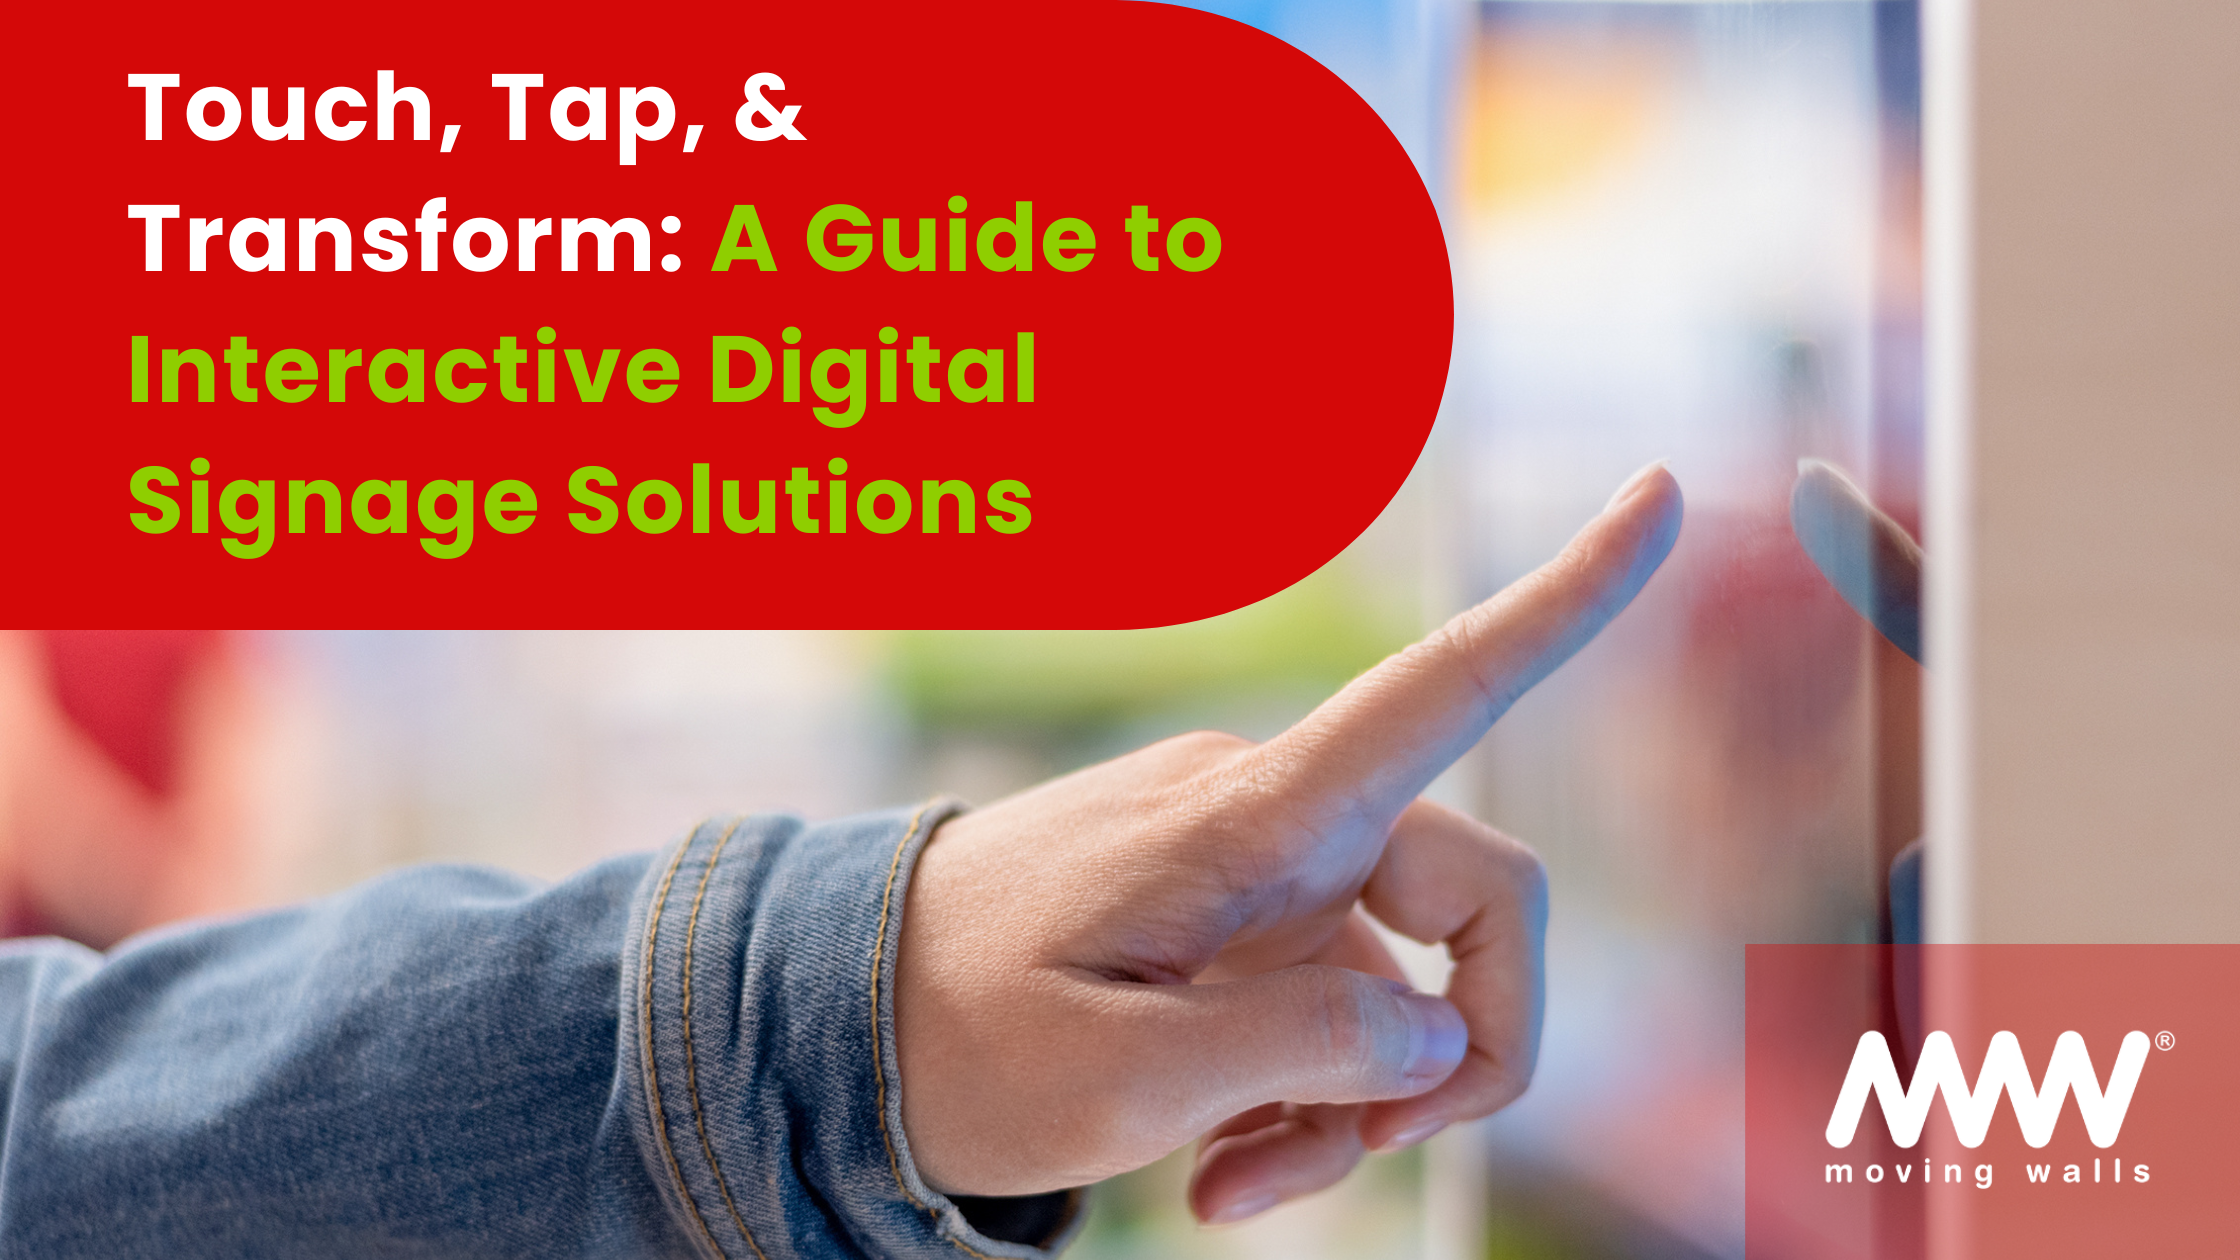 Touch, Tap, & Transform: A Guide to Interactive Digital Signage Solutions